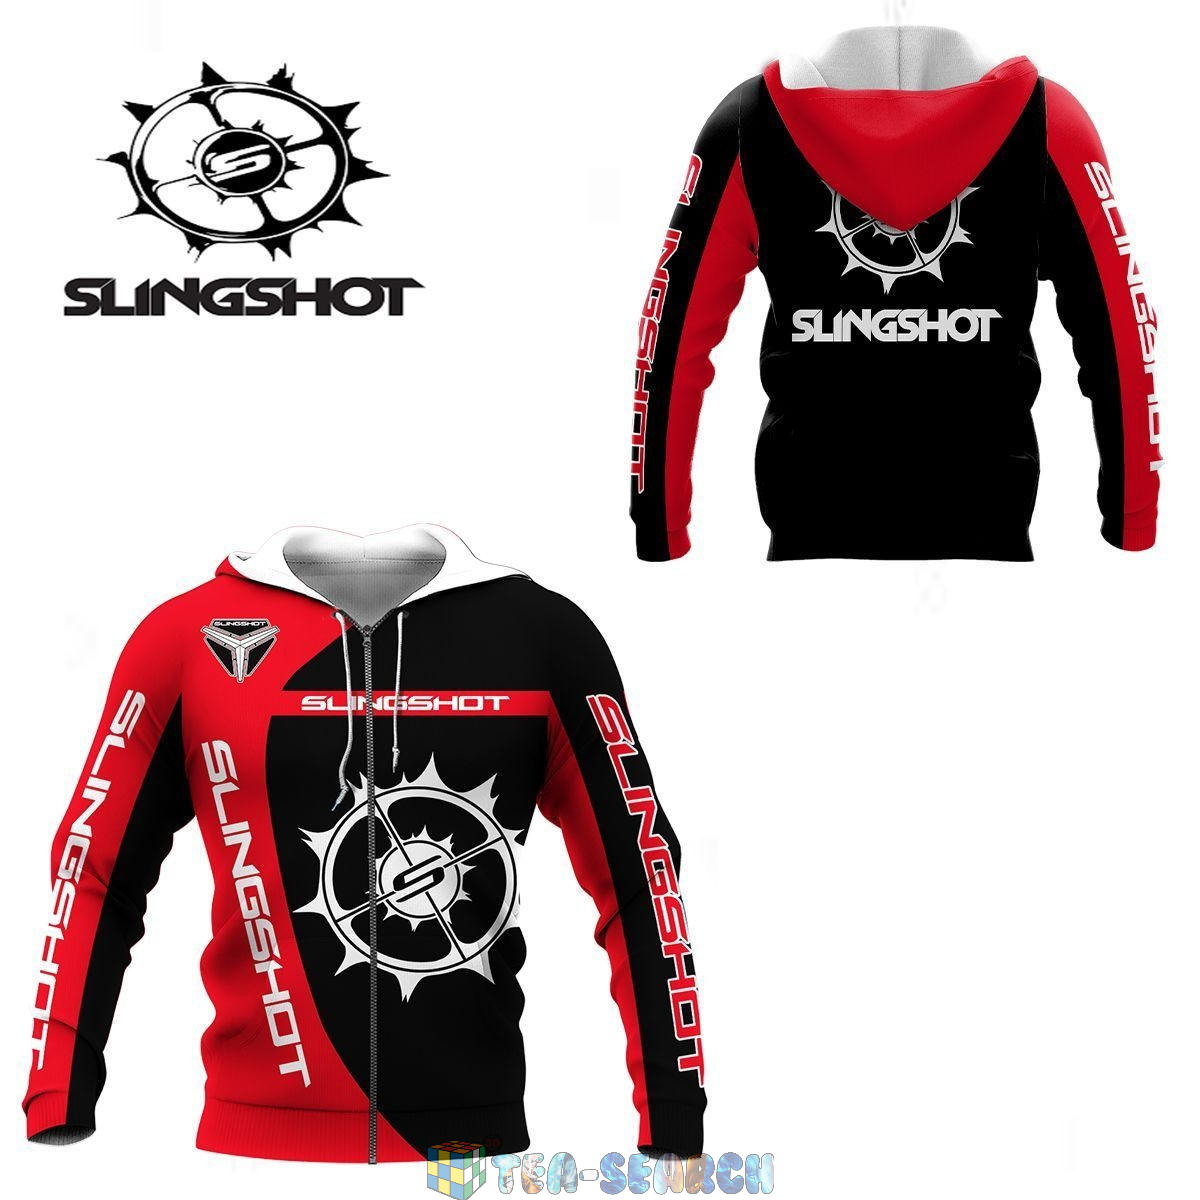 Slingshot ver 5 3D hoodie and t-shirt